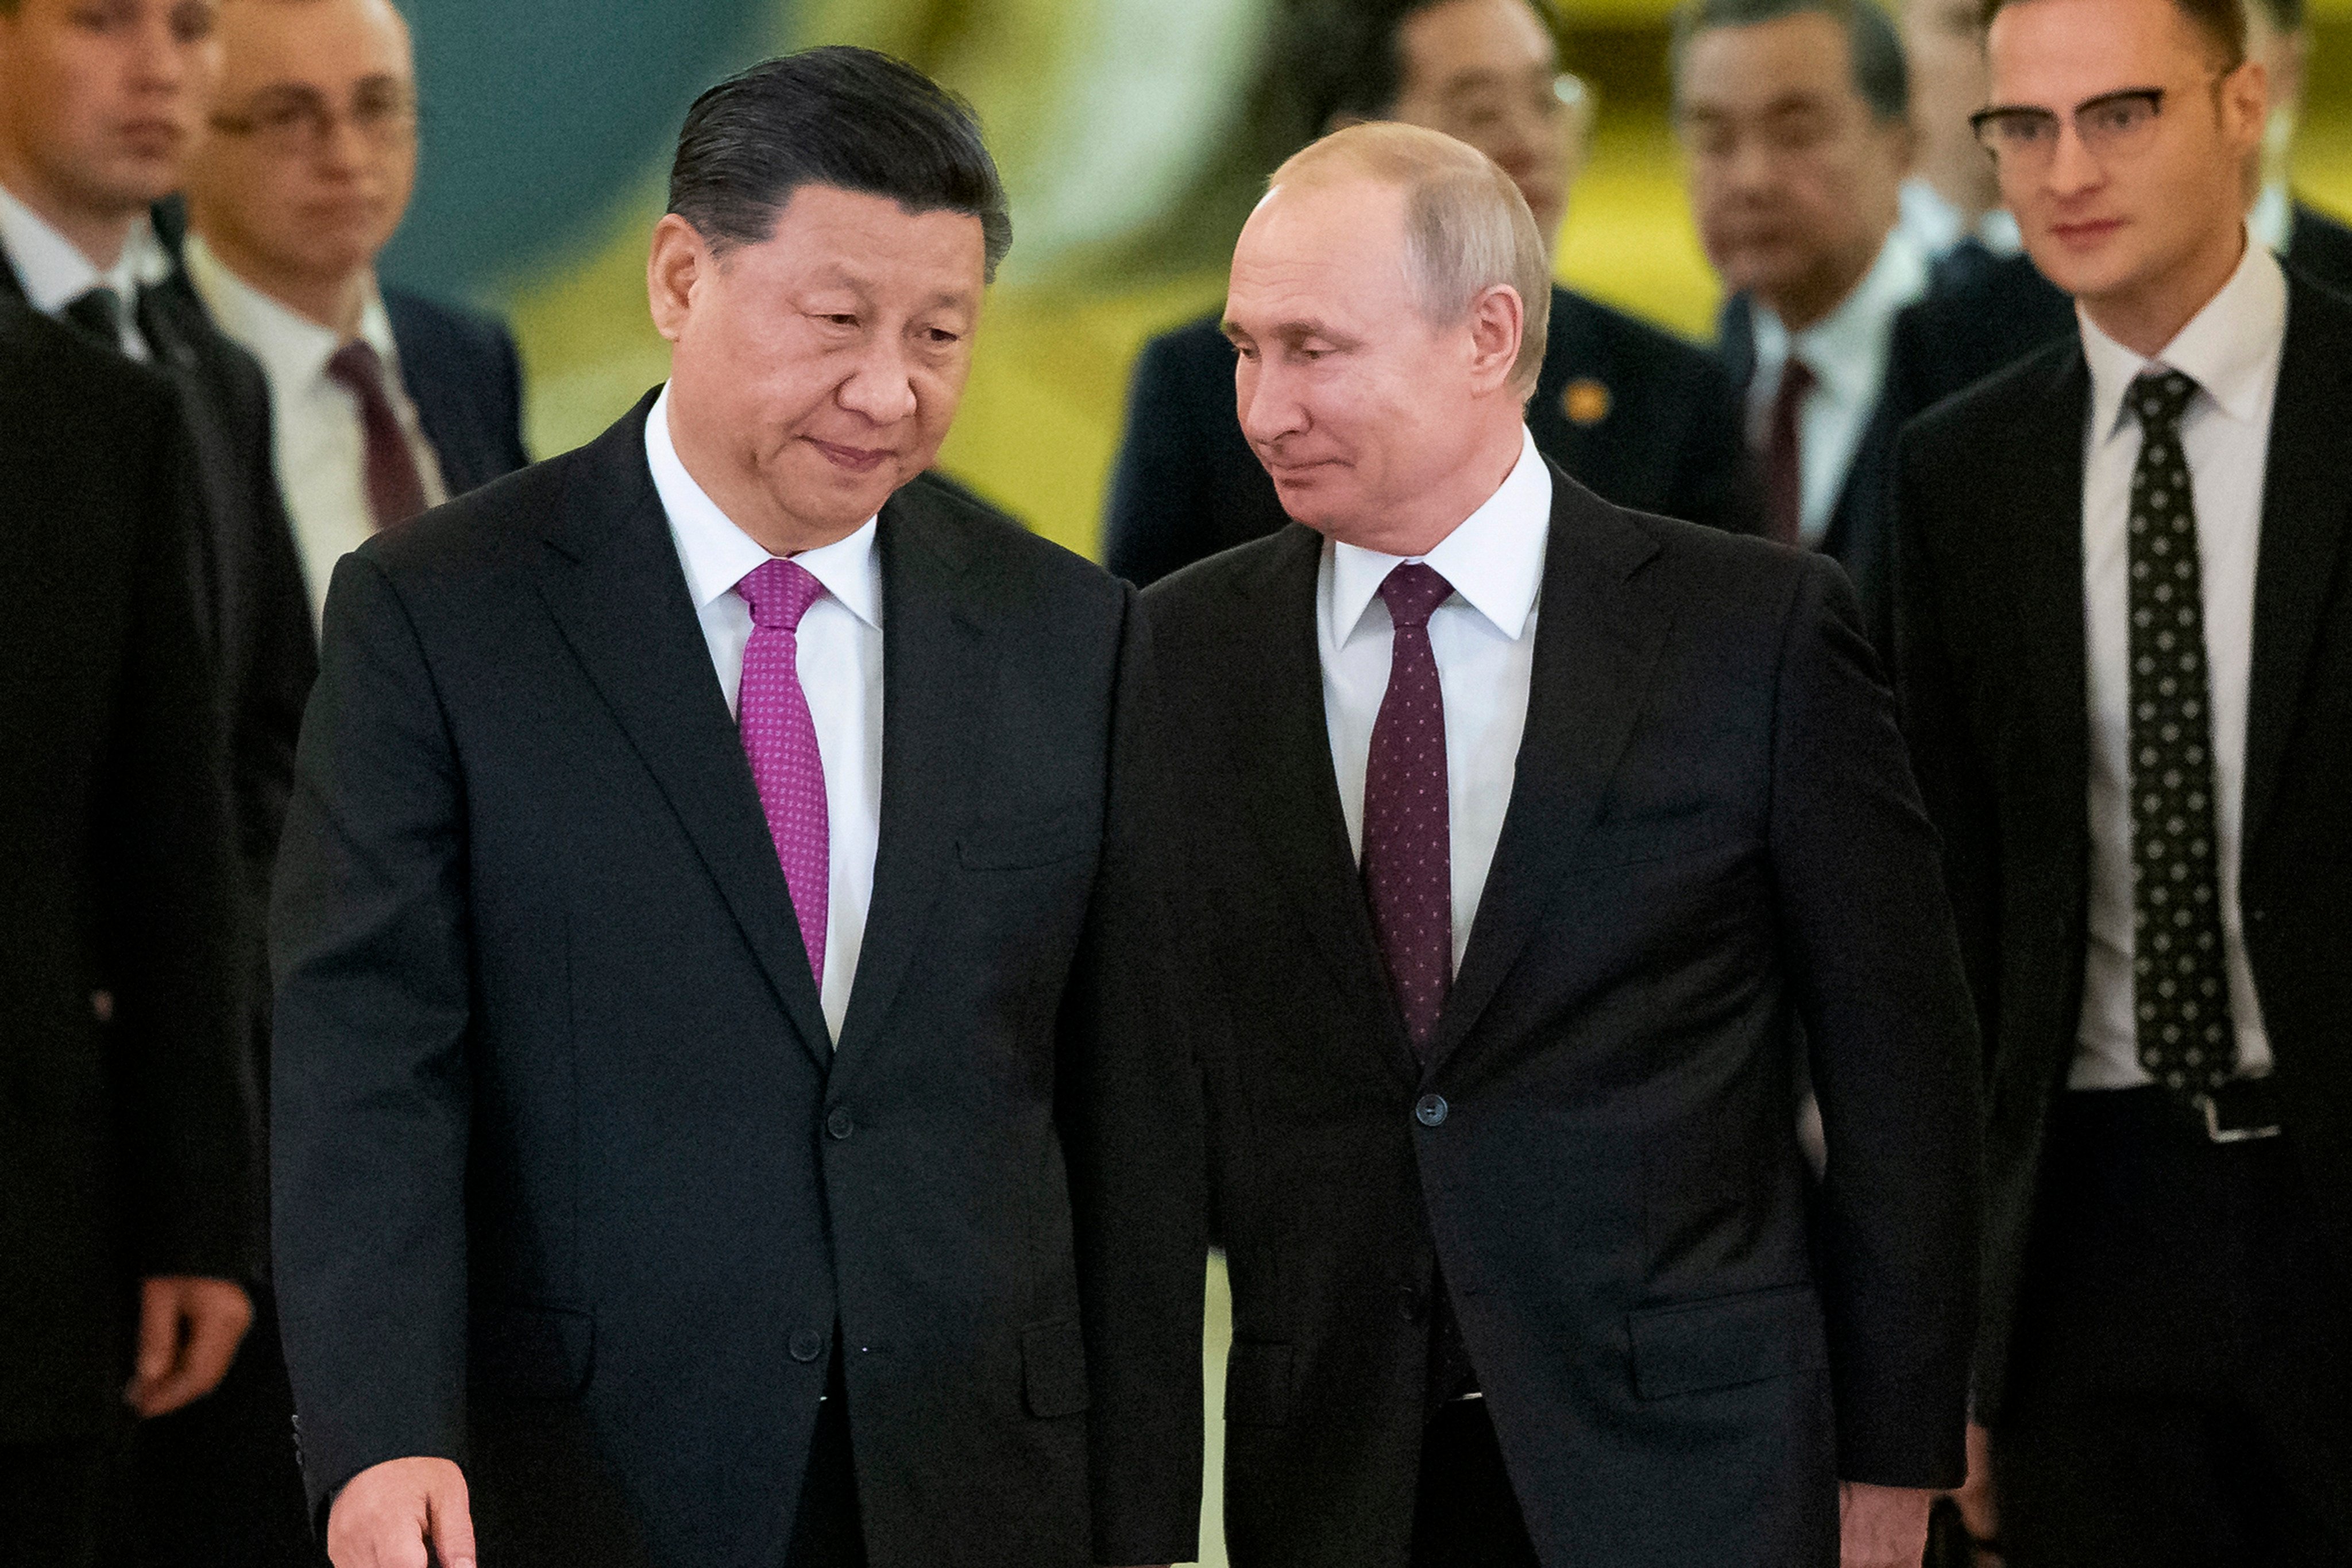 President Xi Jinping (left) and Russian President Vladimir Putin enter a hall for talks in the Kremlin in Moscow on June 5, 2019. The Sino-Russian relationship has come under increased scrutiny as China faces accusations of supporting Moscow despite declaring a ‘neutral’ stance. Photo: AP